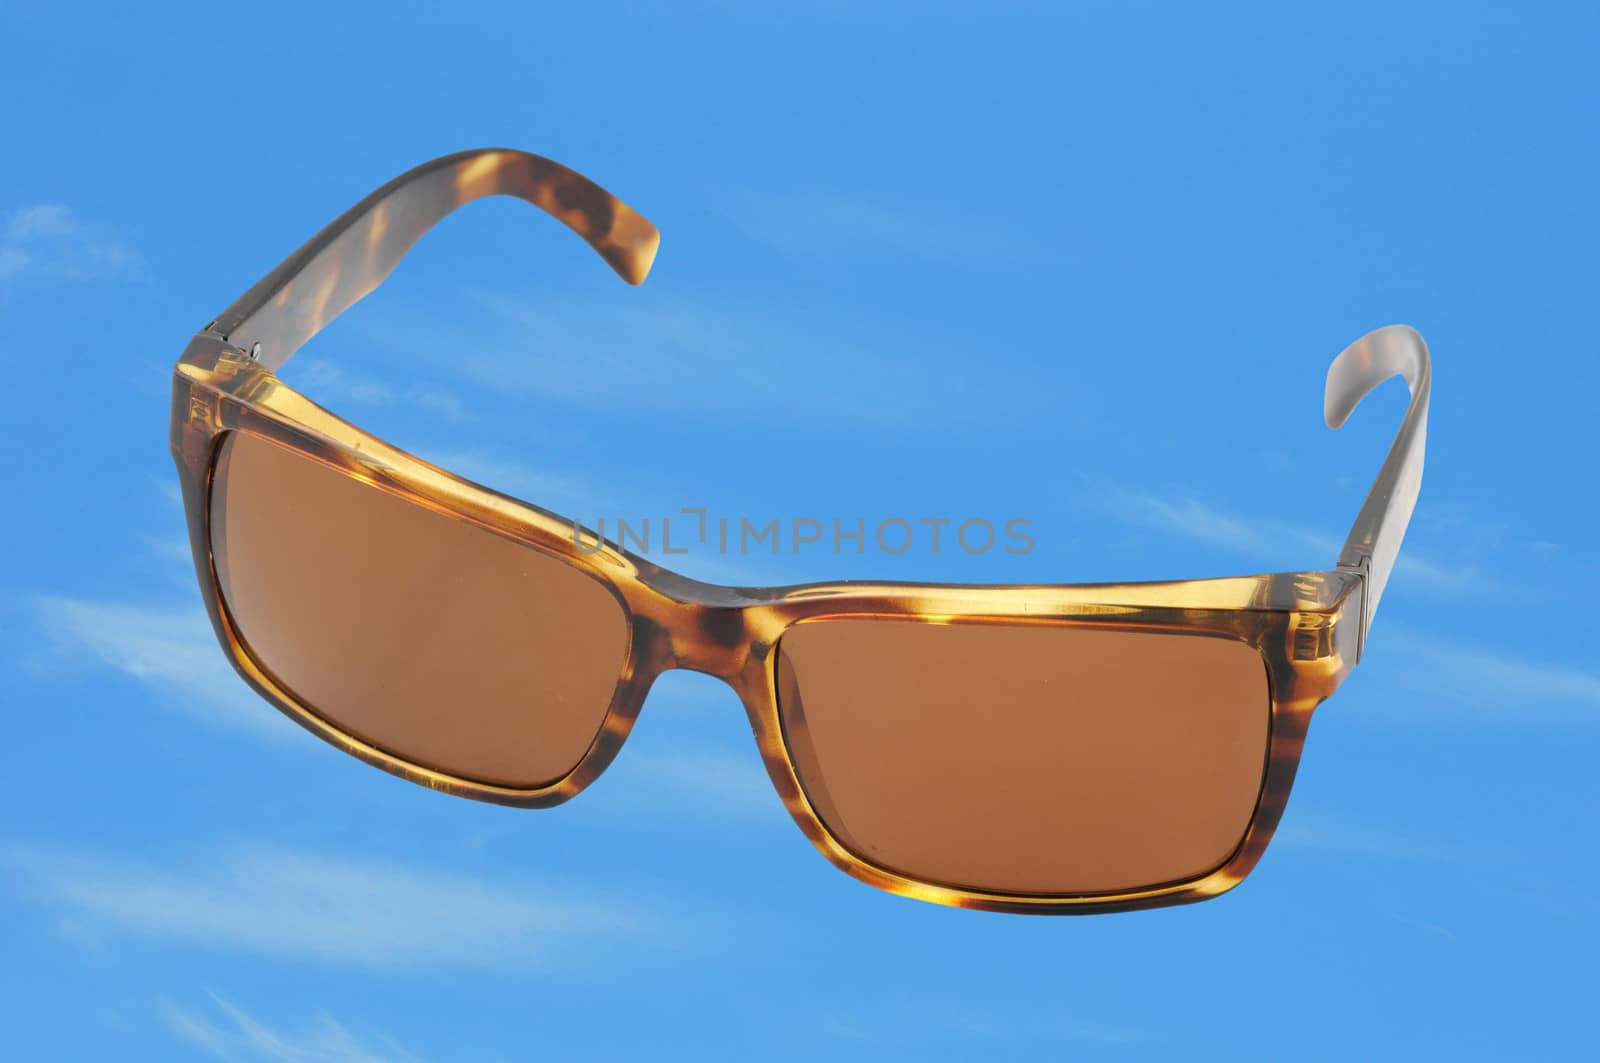 brown sunglasses for fashion on a bright blue sky